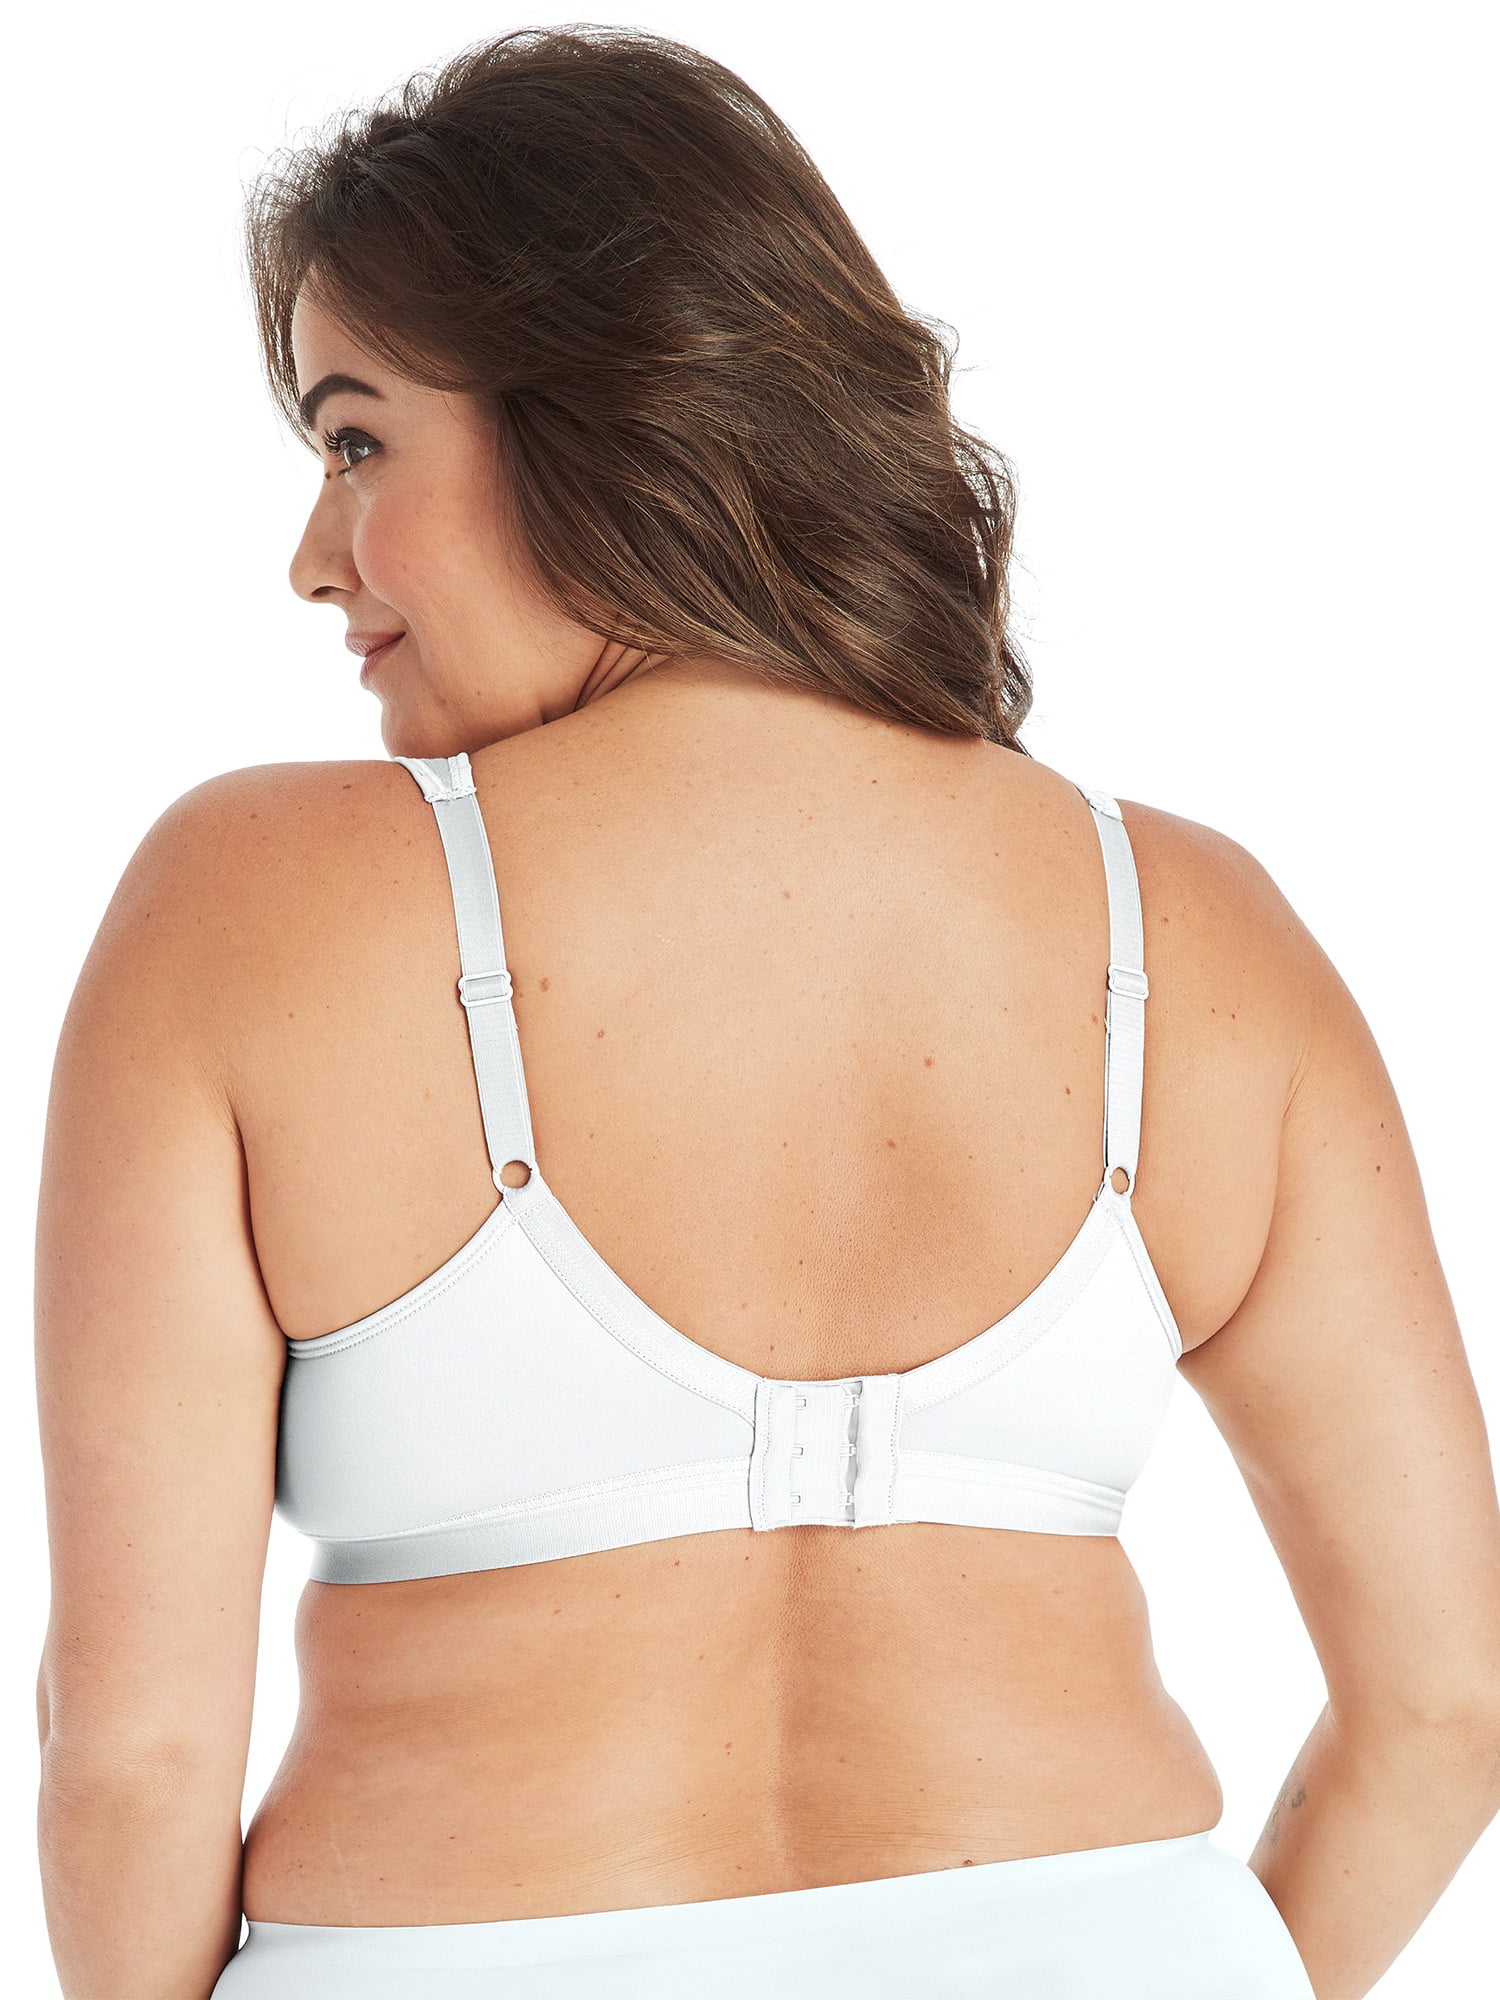 Playtex Womens 18 Hour Active Lifestyle Full Coverage Bra #4159